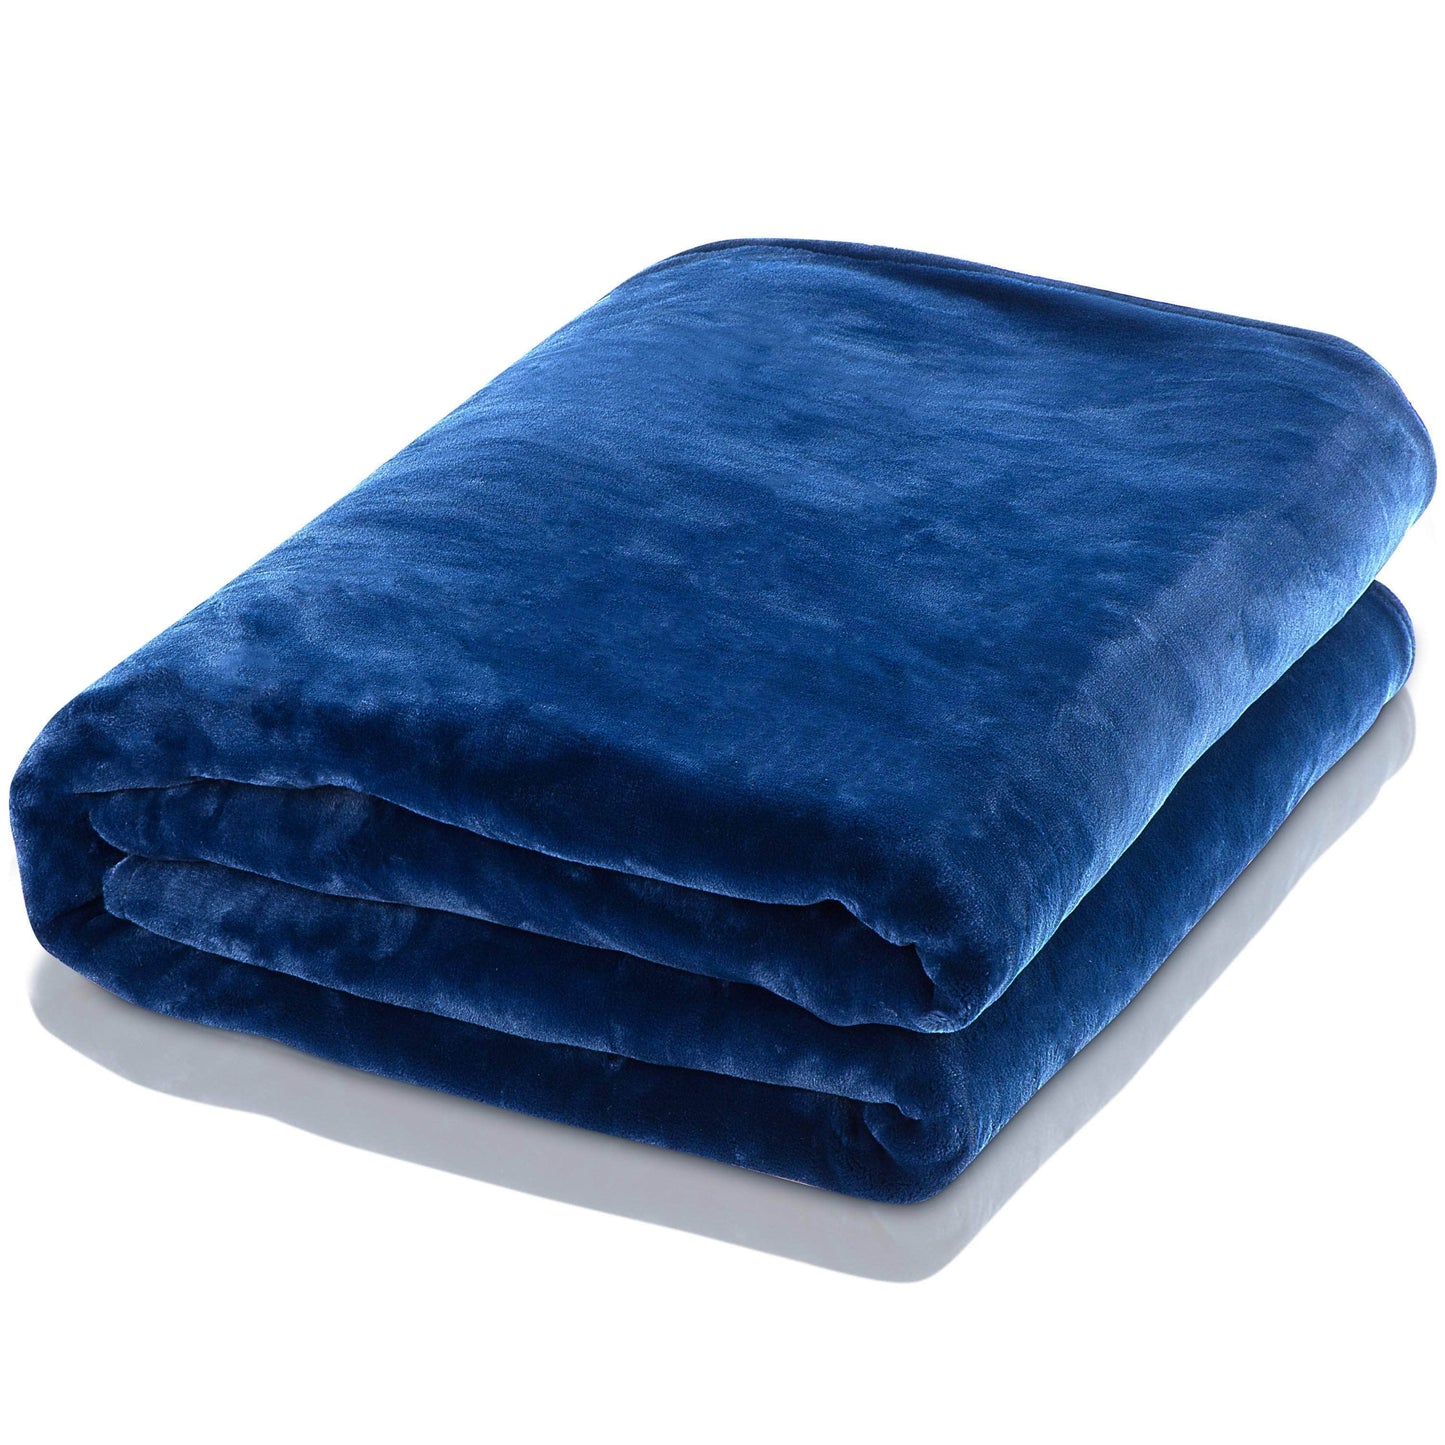 Hush Blankets Blanket Hush 8lb Weighted Throw Sherpa Fleece Blanket - Available in 2 Colours